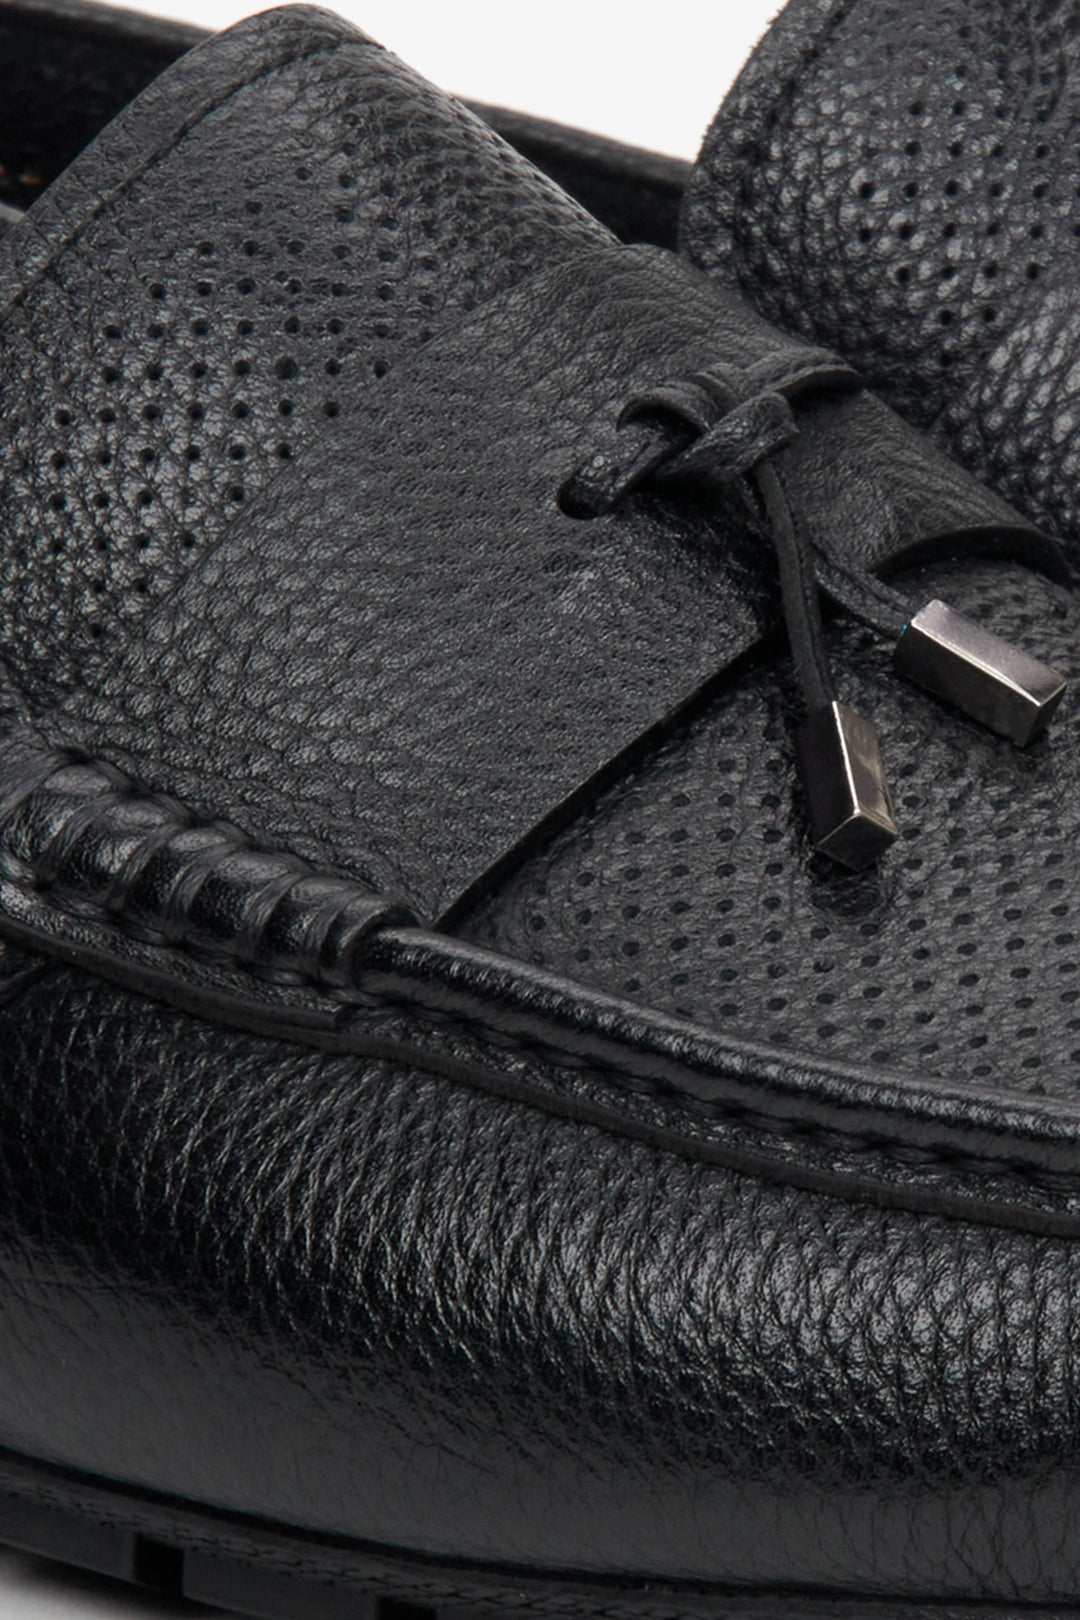 Men's black leather loafers for fall - close-up on the details.